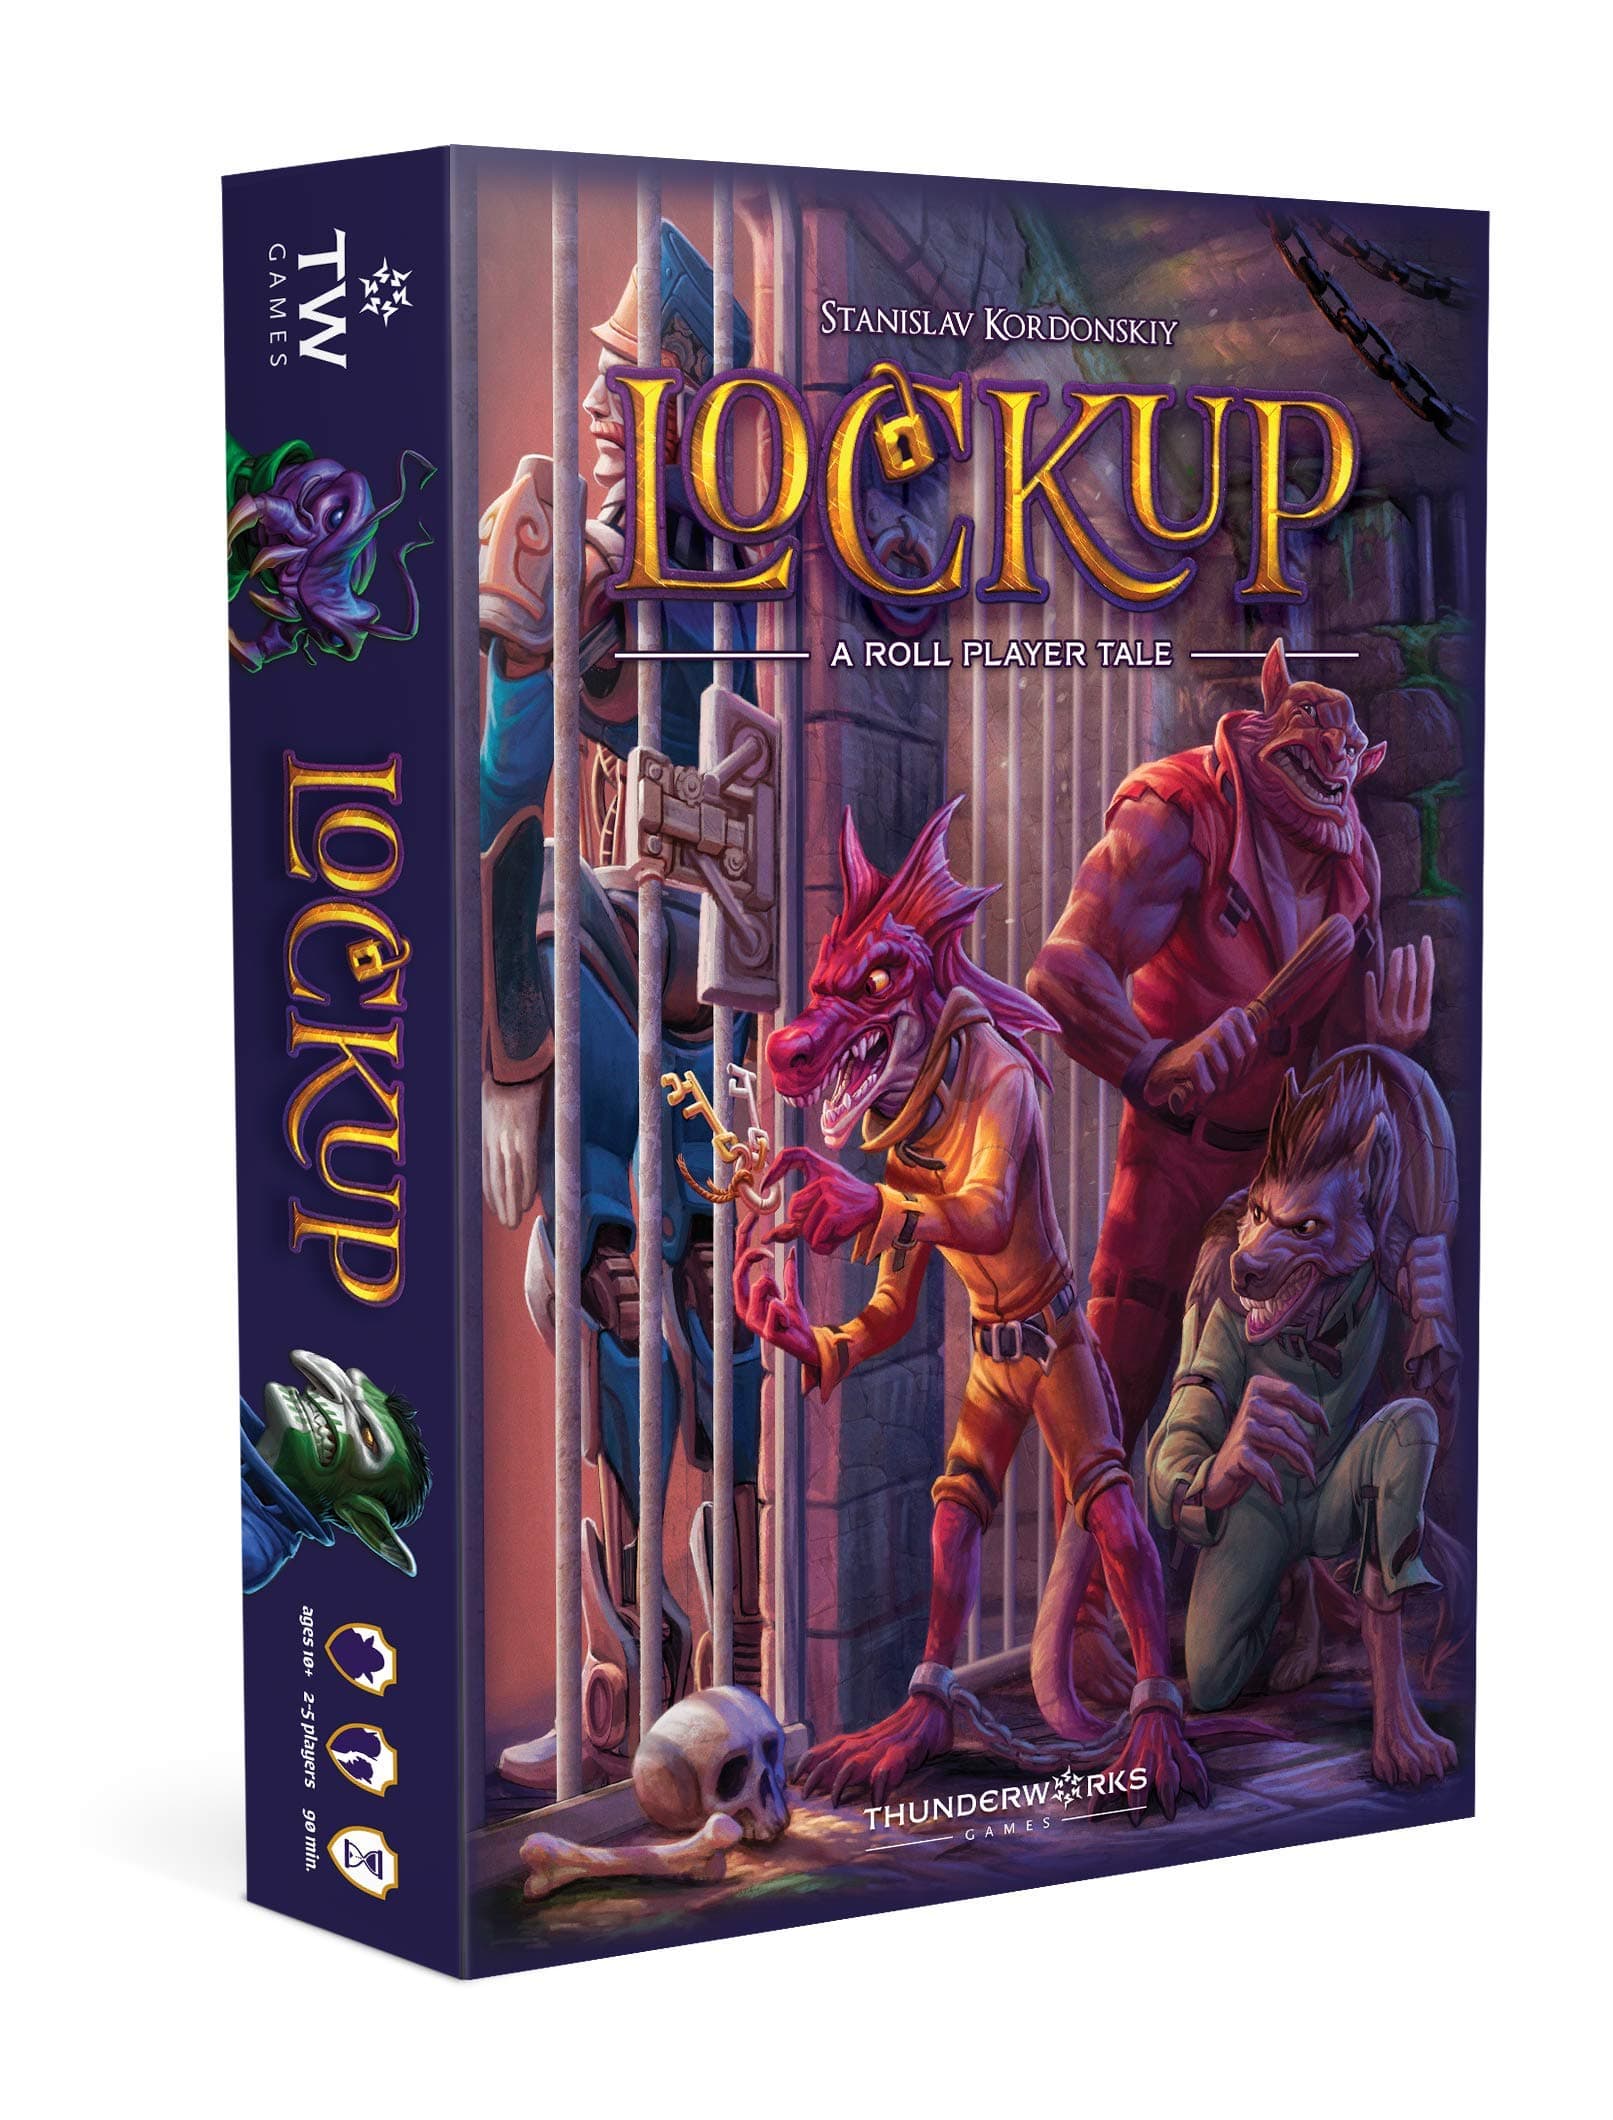 Thunderworks Games Board Games Thunderworks Games Lockup: A Roll Player Tale